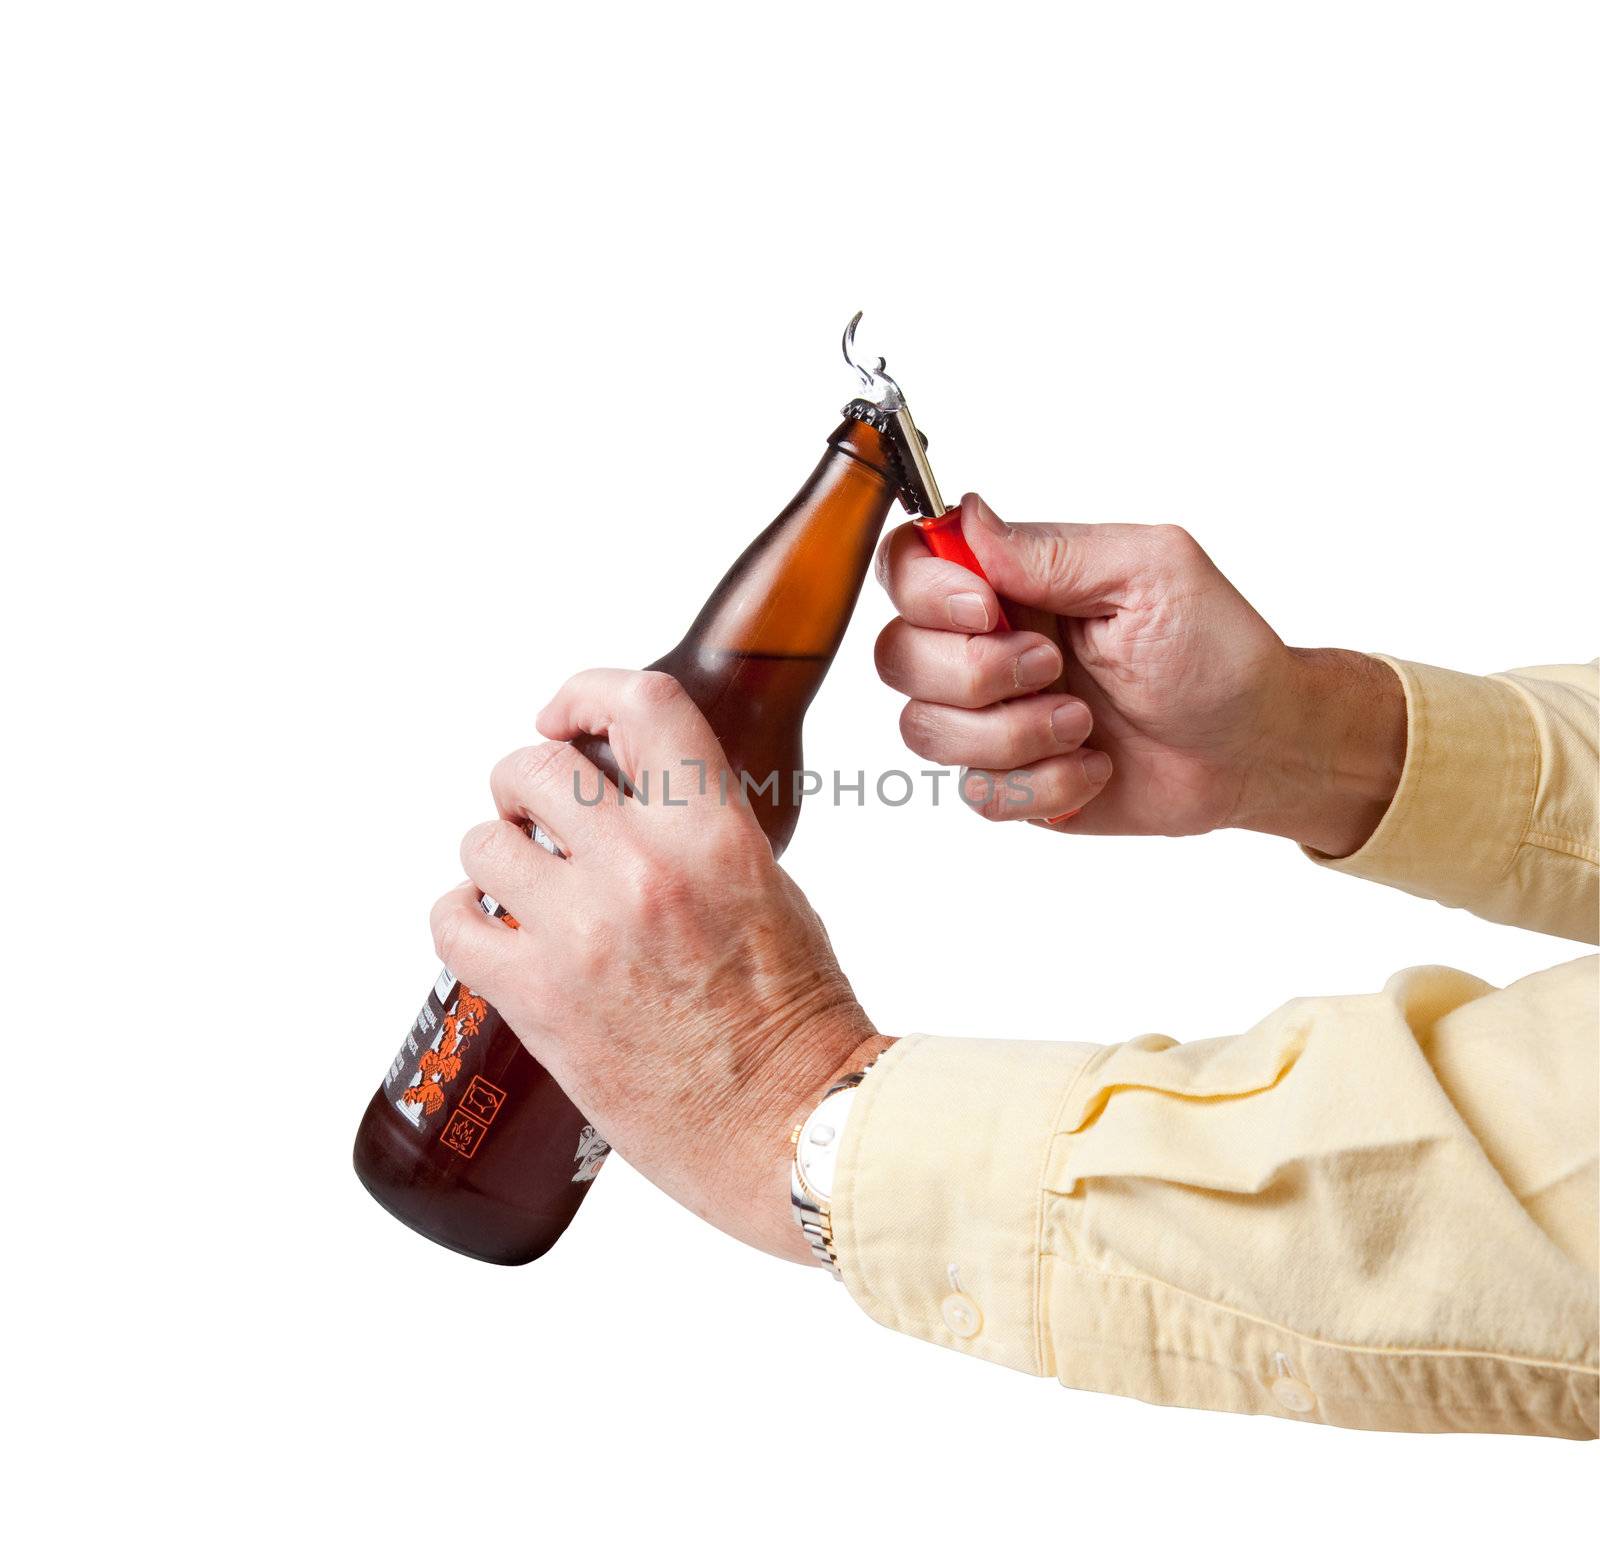 Cap being removed from beer bottle by steheap